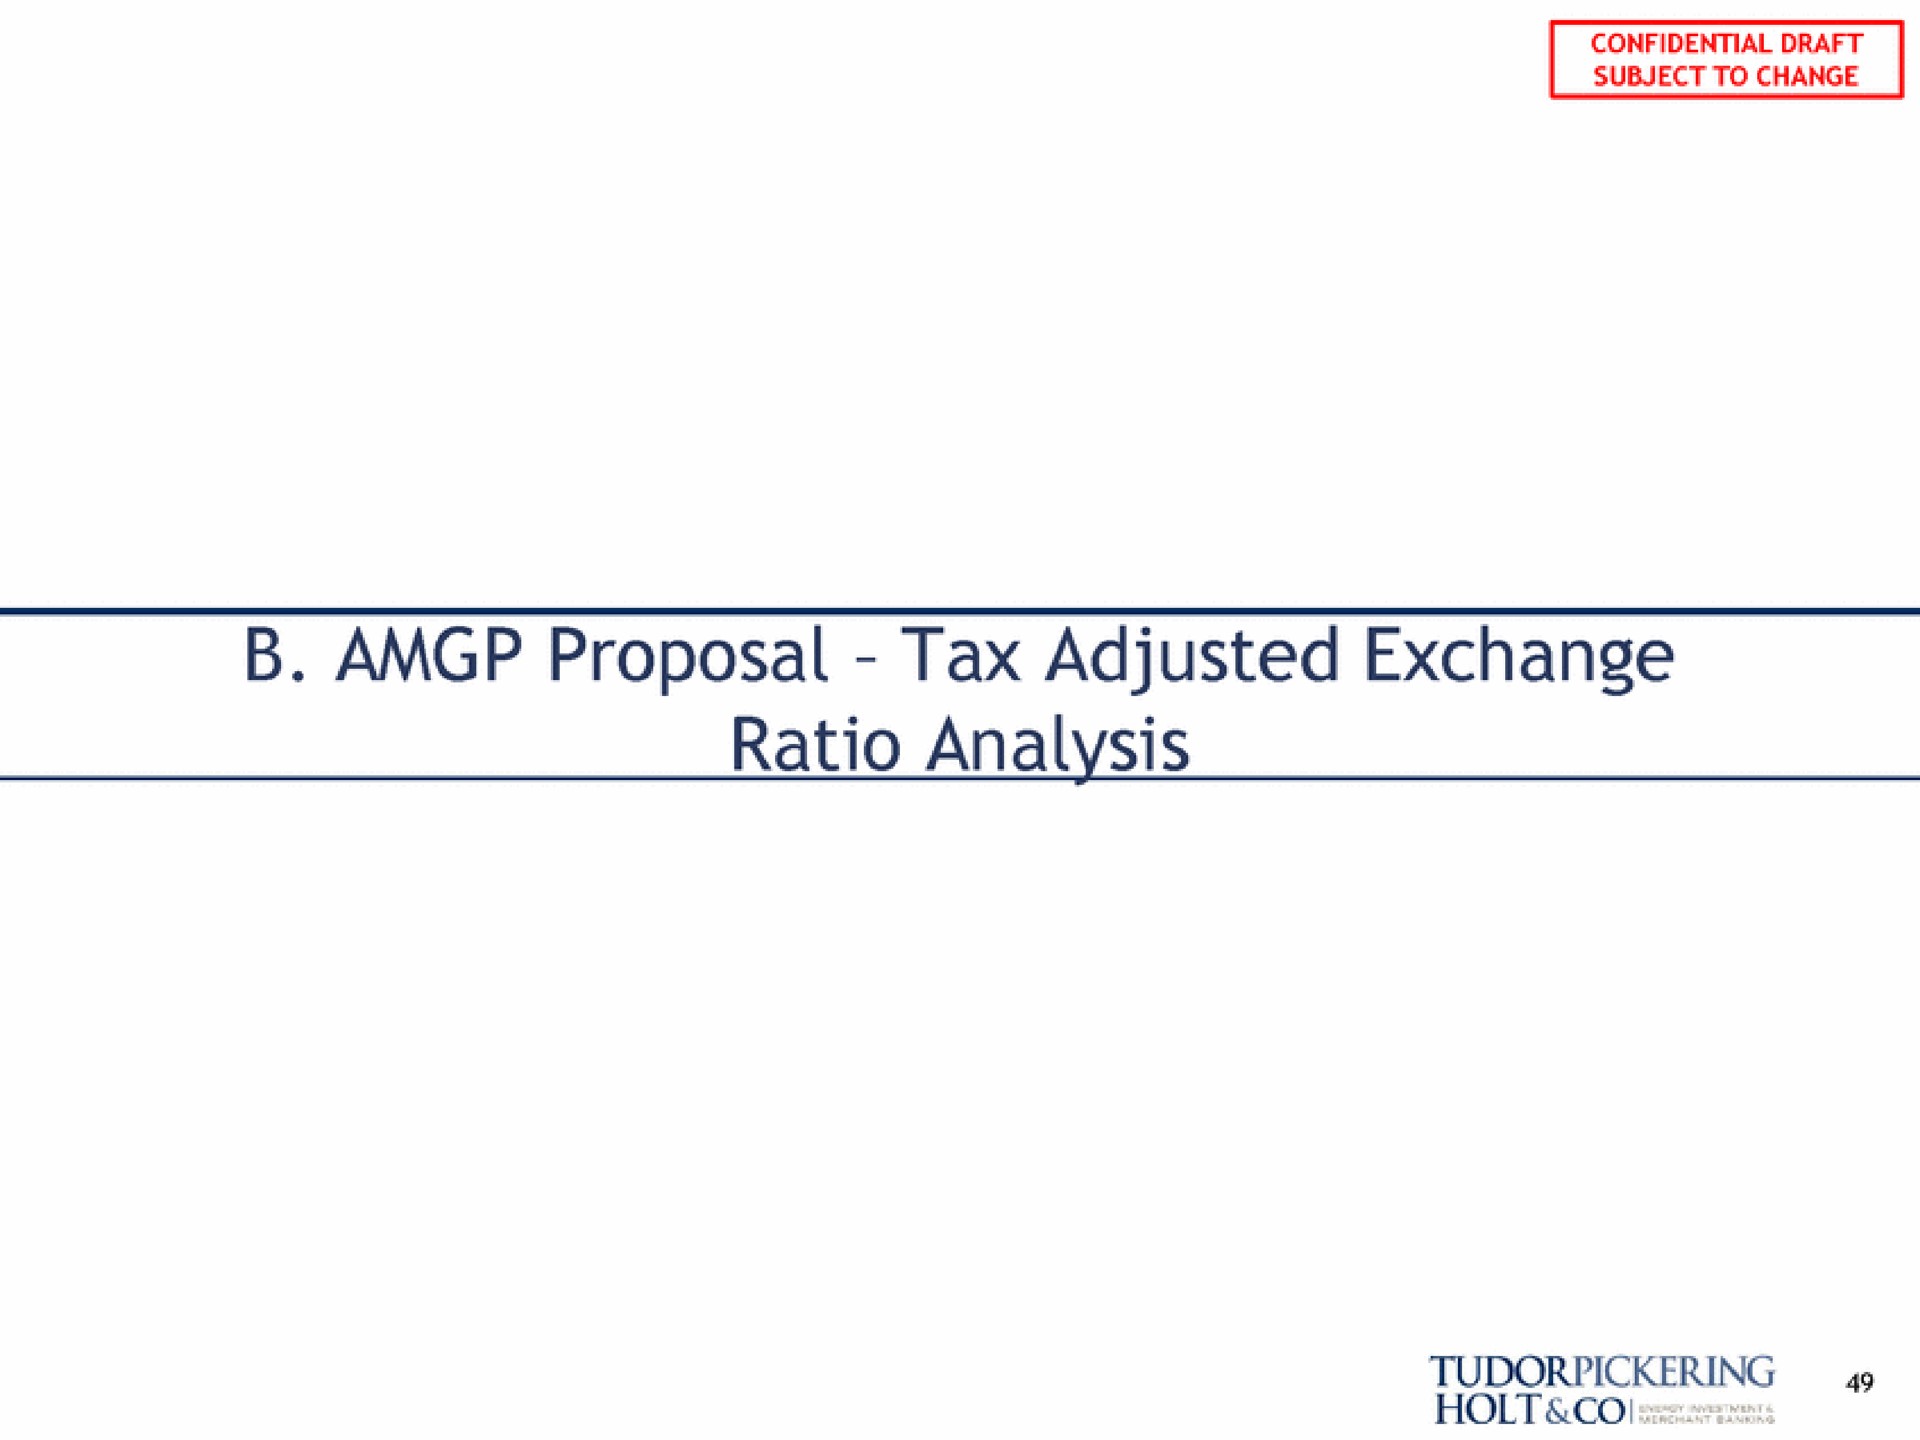 subject to change proposal tax adjusted exchange ratio analysis | Tudor, Pickering, Holt & Co